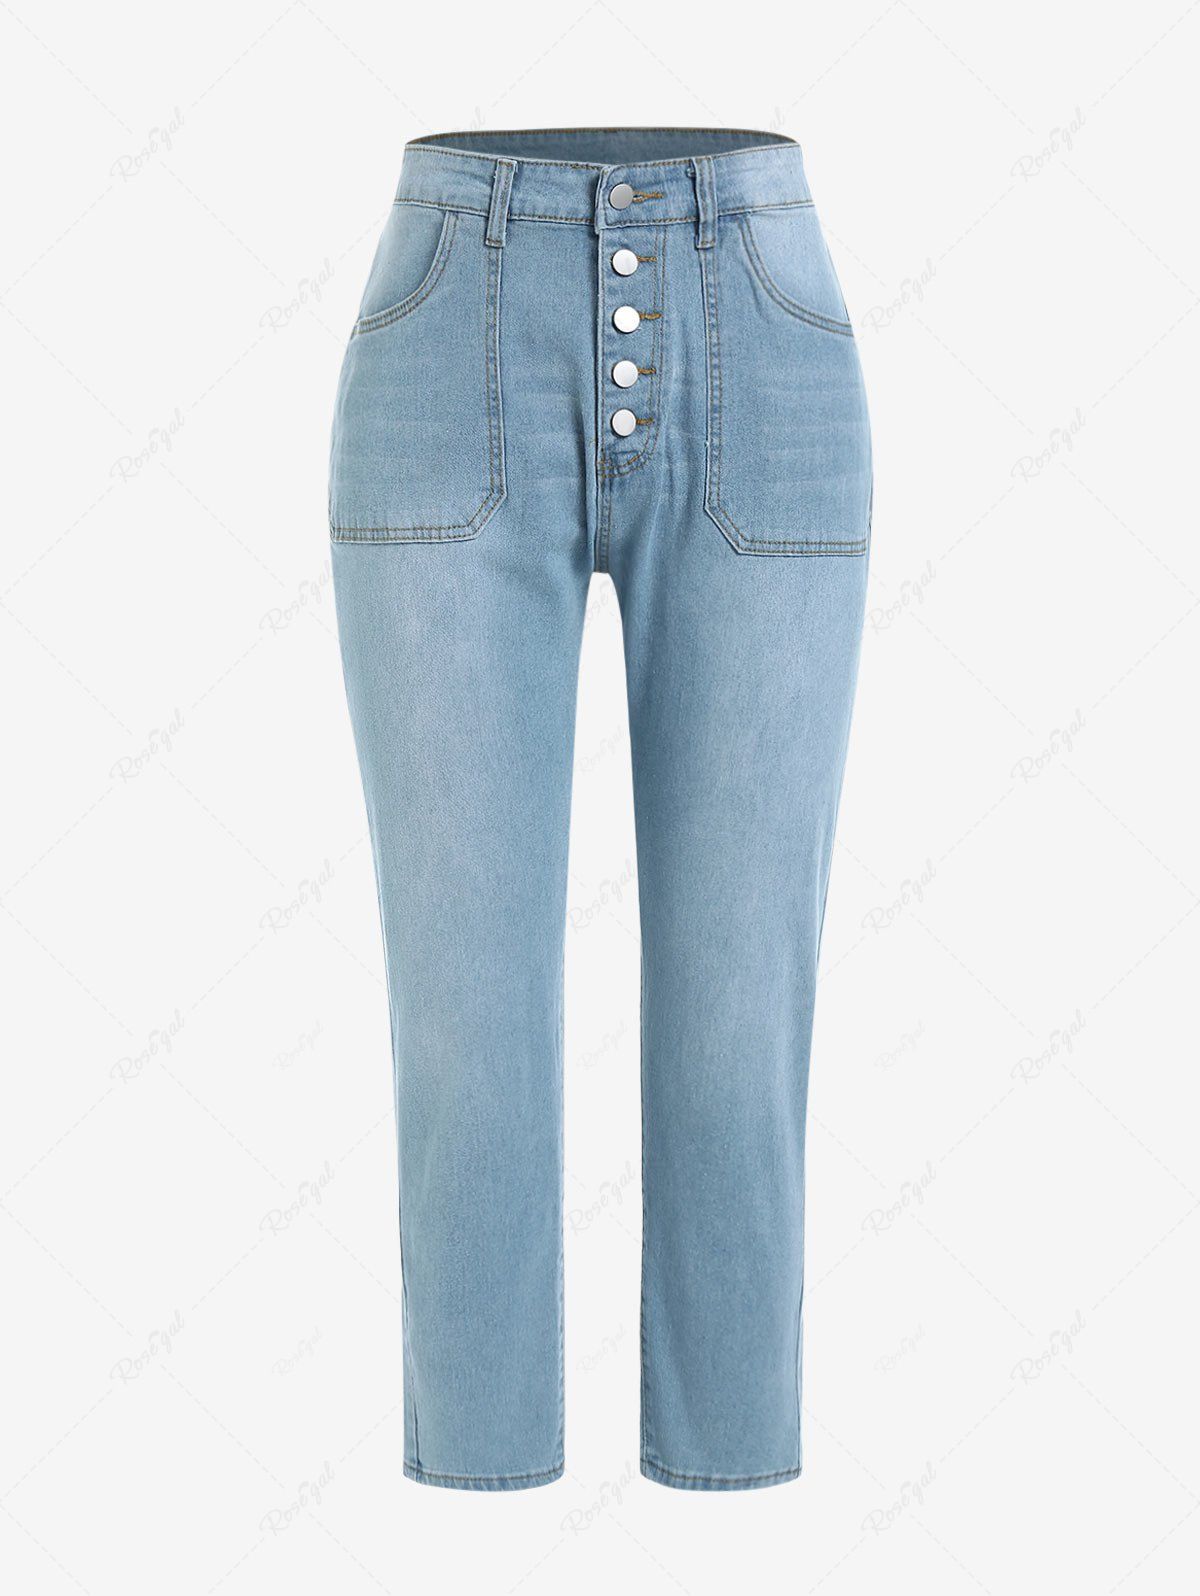 Buy Plus Size Topstitching Button Fly Jeans with Pockets  